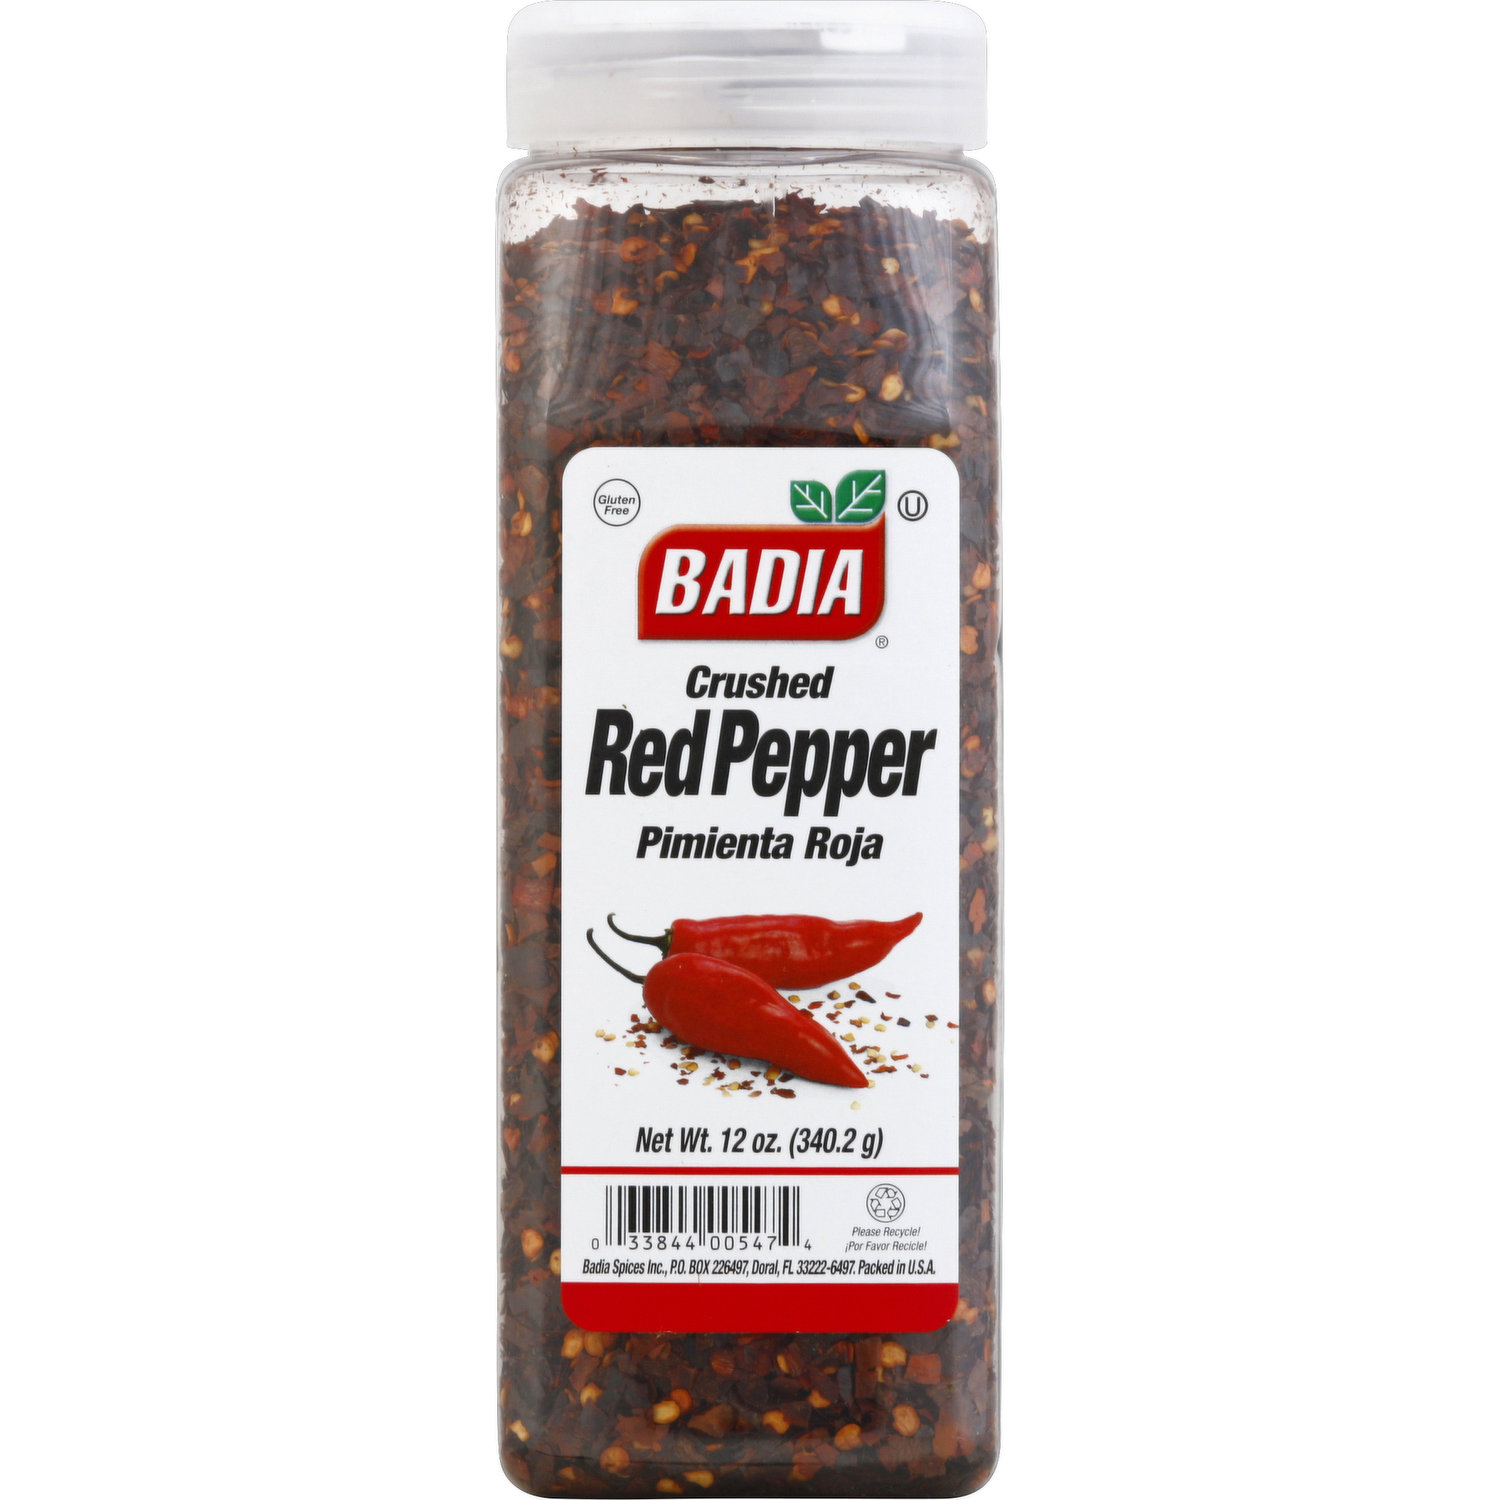 Badia Spices, Inc. - Our Orange Pepper is a flavorful sprinkle of